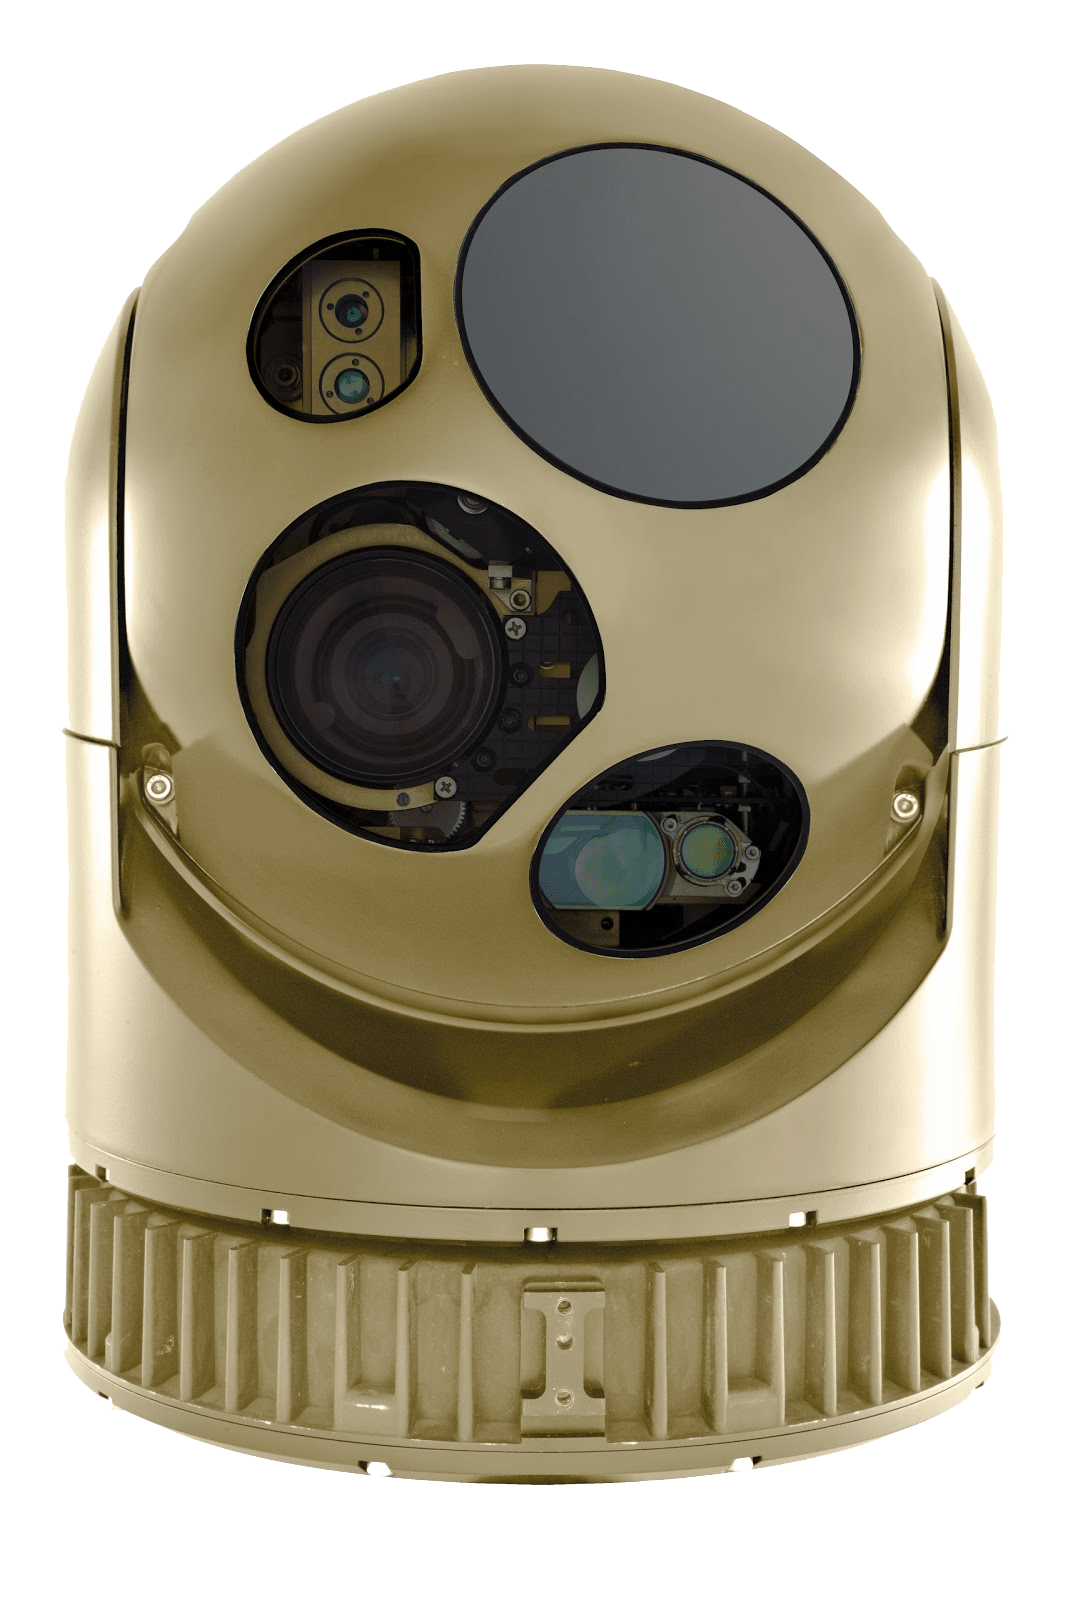 L-3 WESCAM’s MX-10GS camera, which is gold and round.